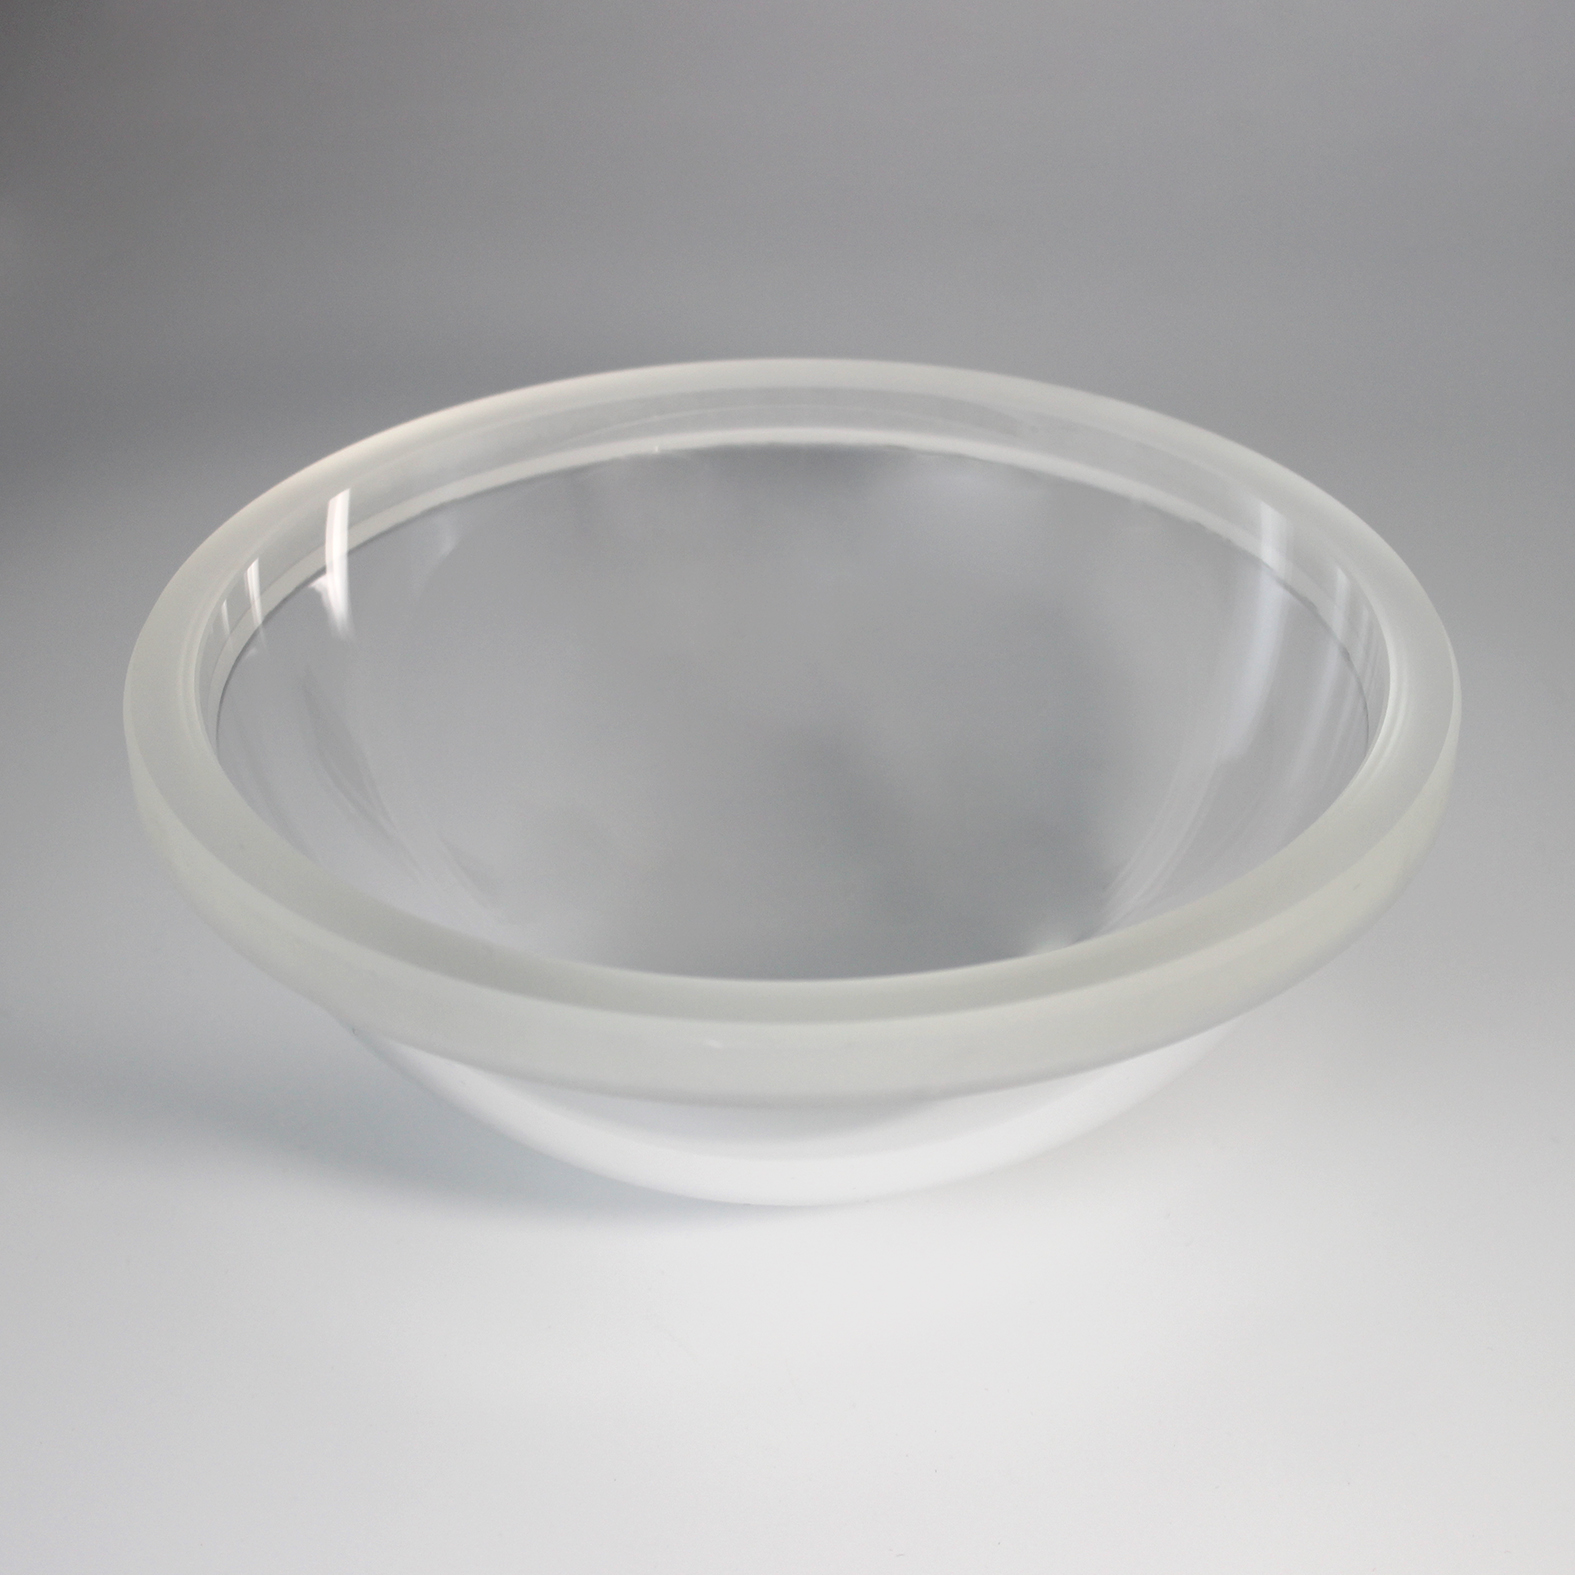 Changchun VY Optics Factory Customized Subsea Camera Protection K9 Sapphire Glass Flange Dome Lens